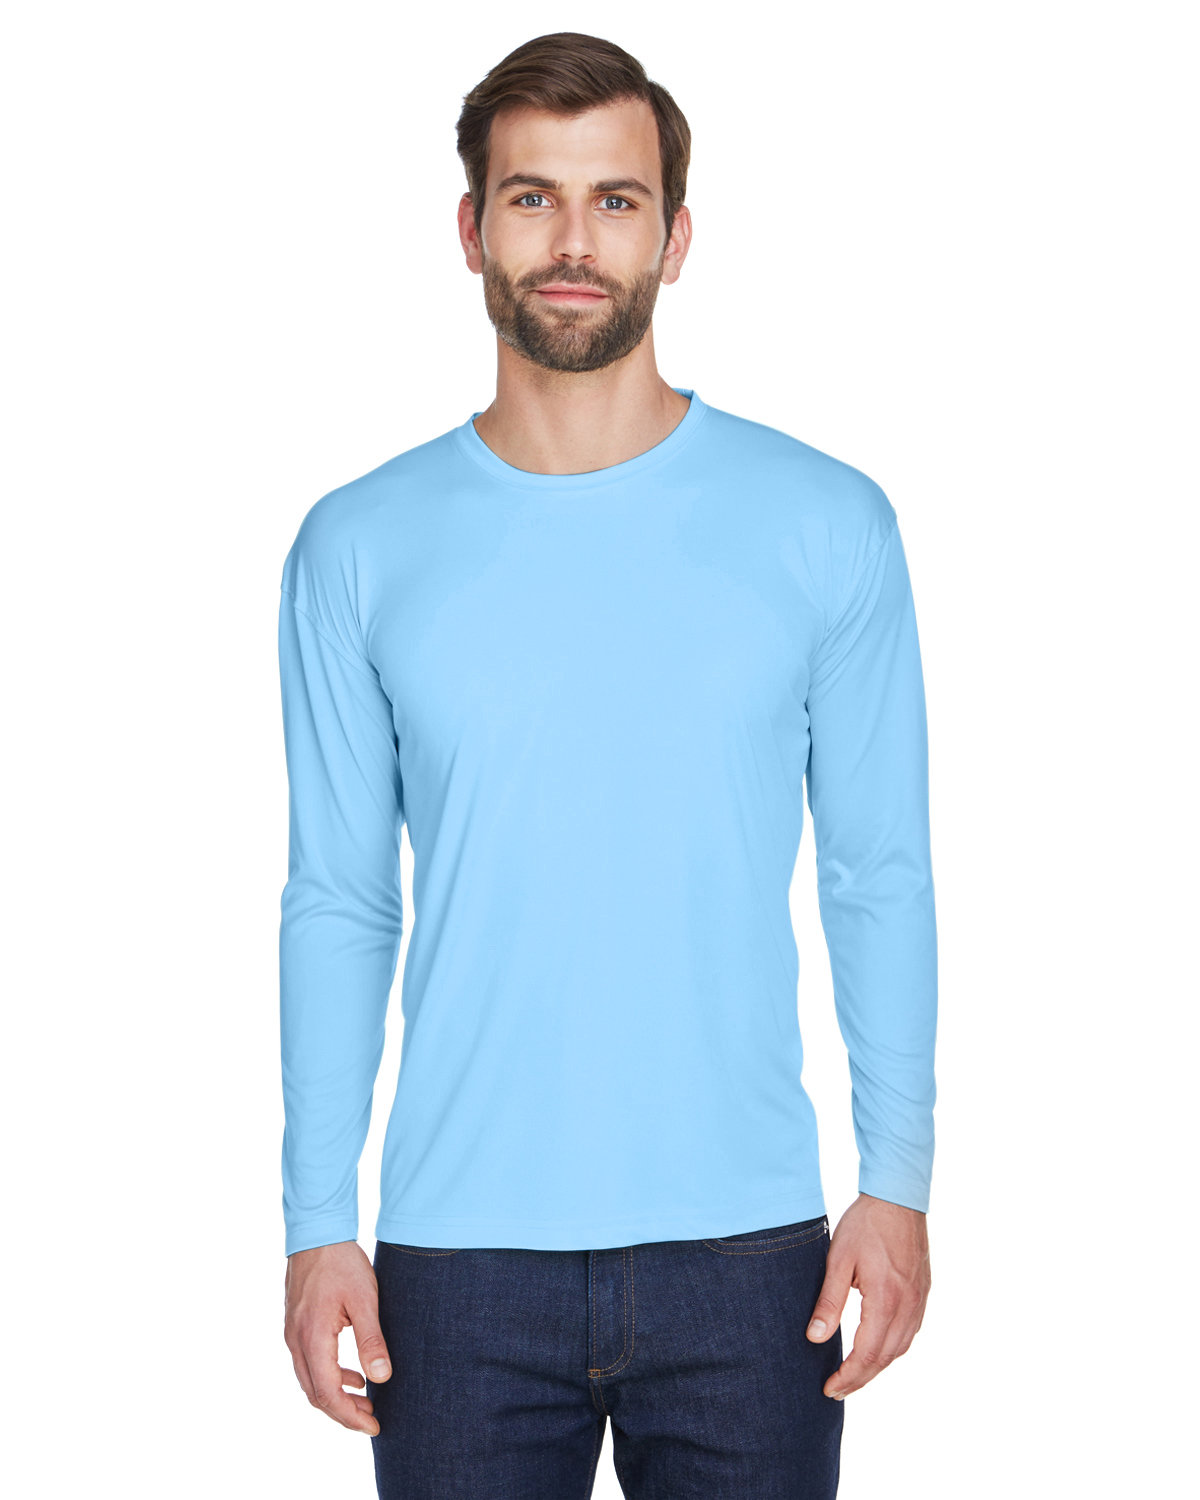 Men's Long Sleeve Shirt UPF 50 Quick Dry for Outdoor Sports, Bright Blue / L